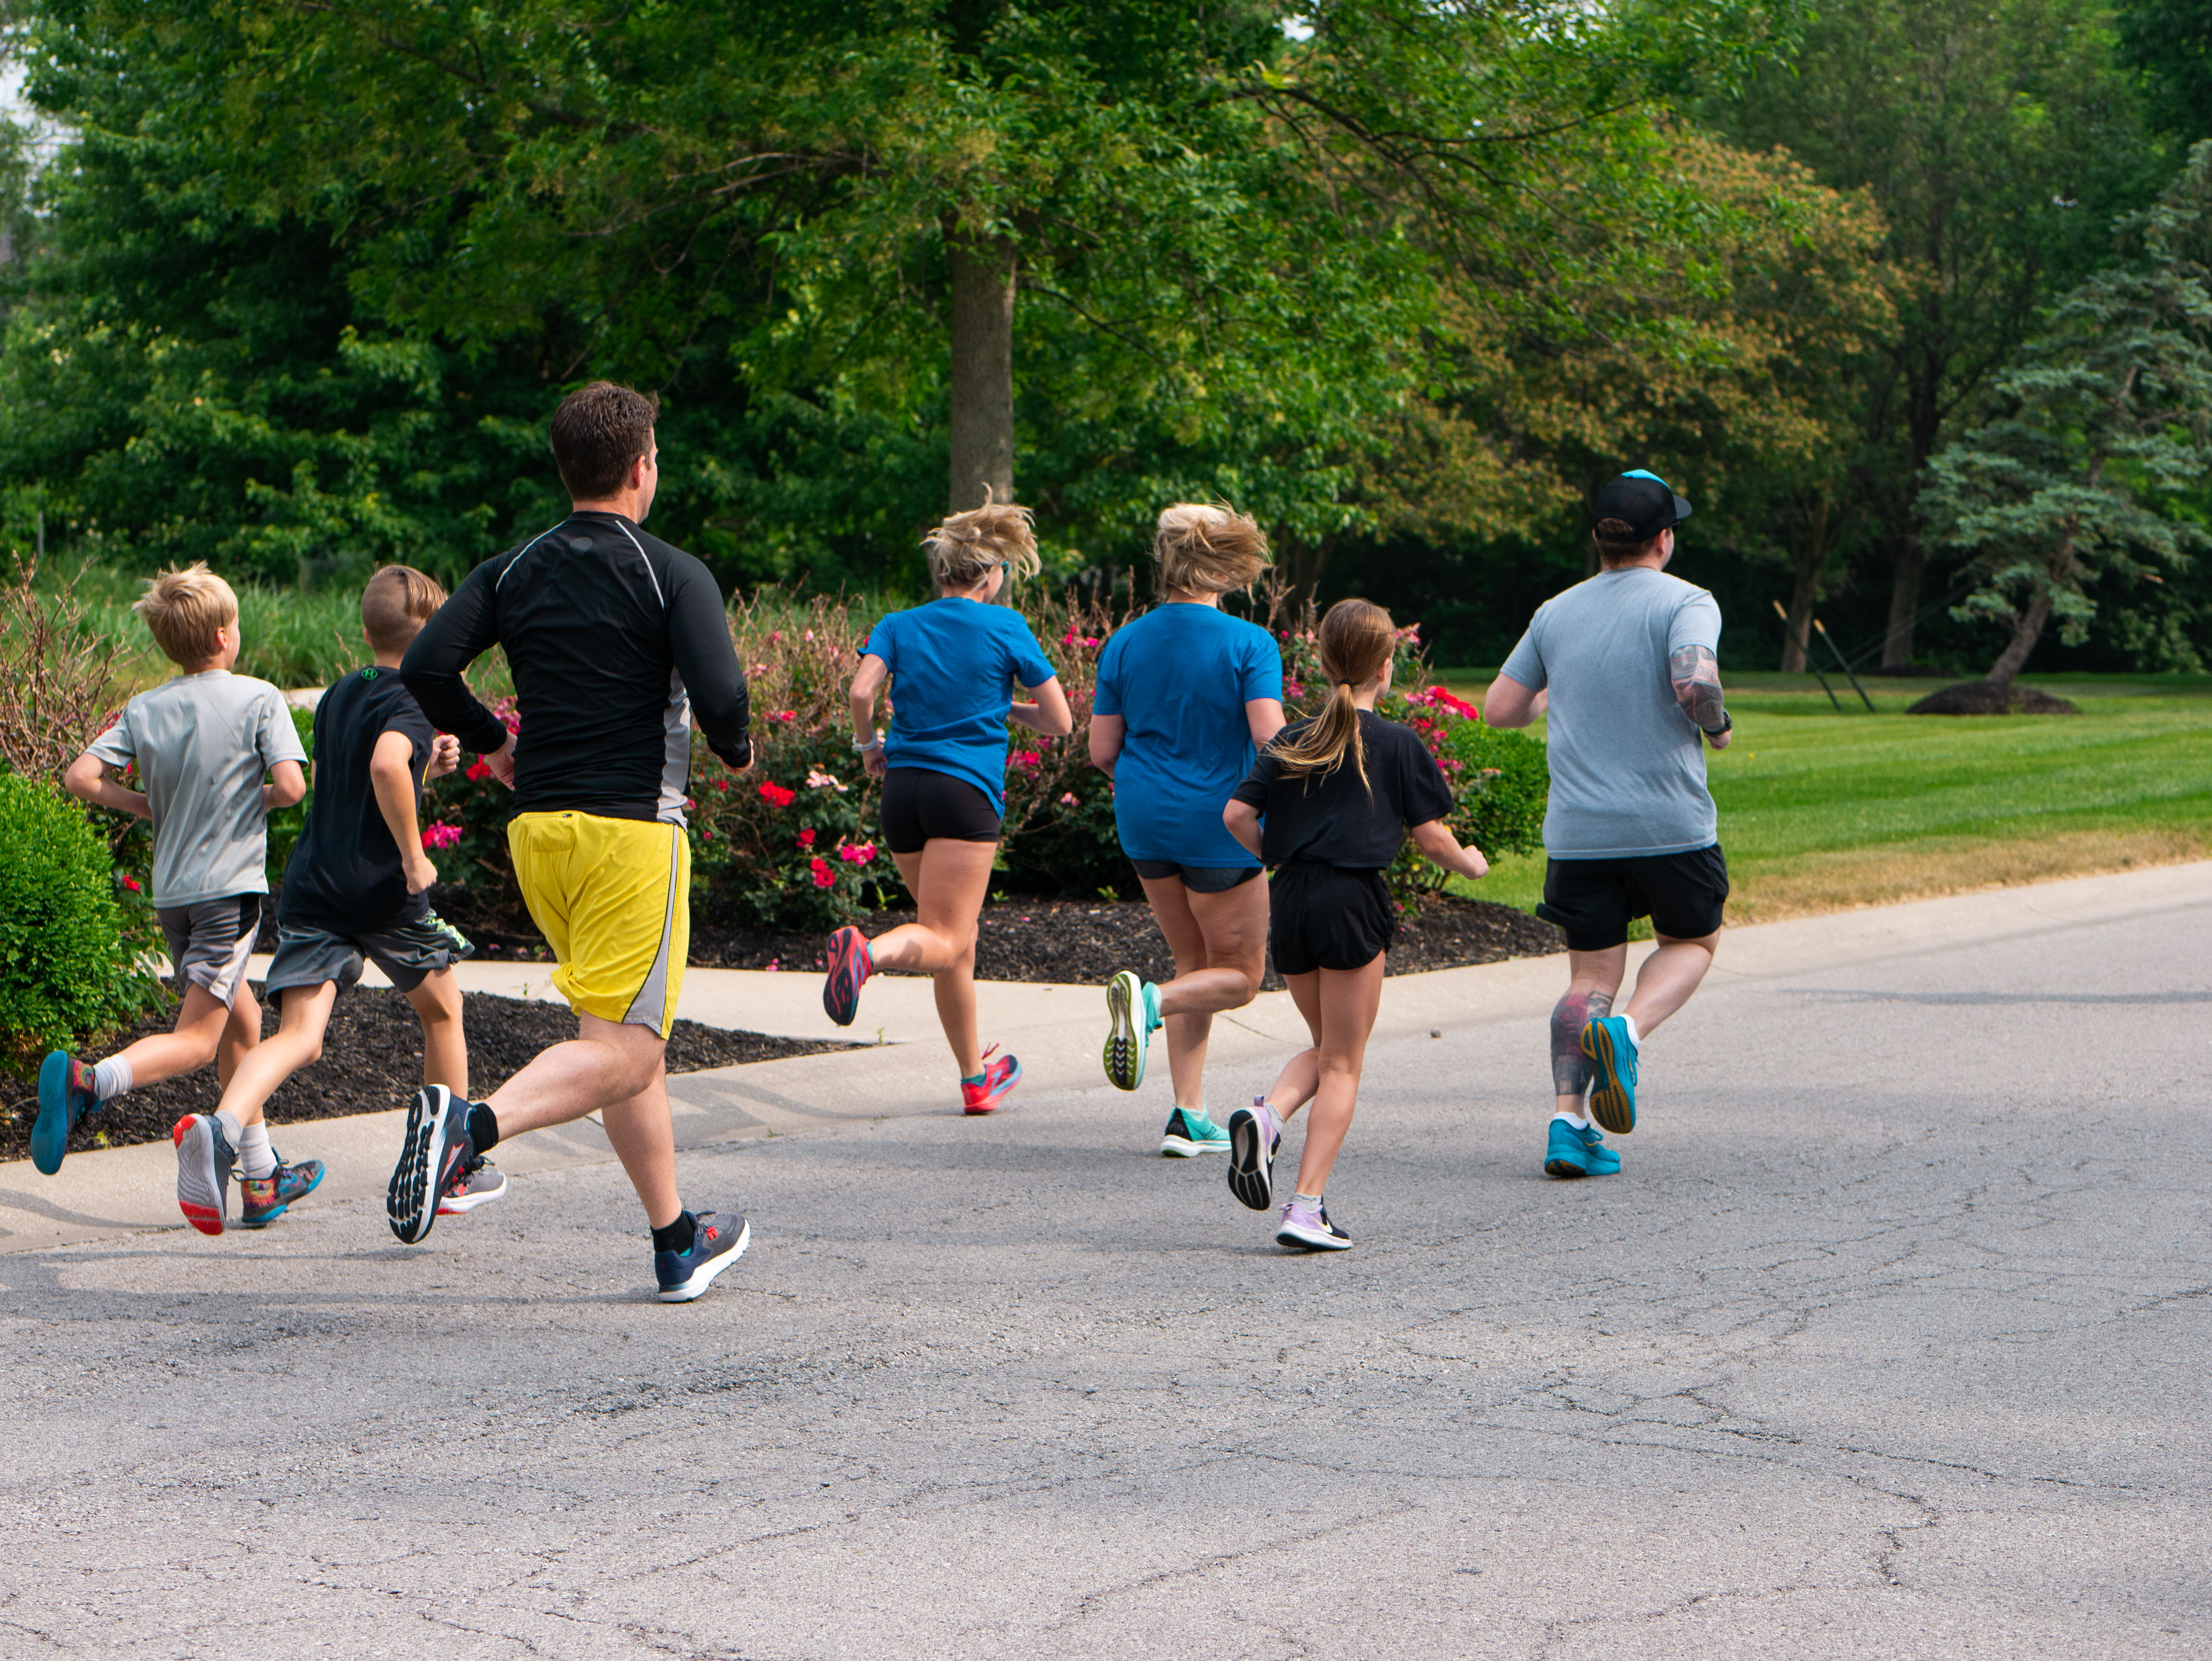 Adults and children running